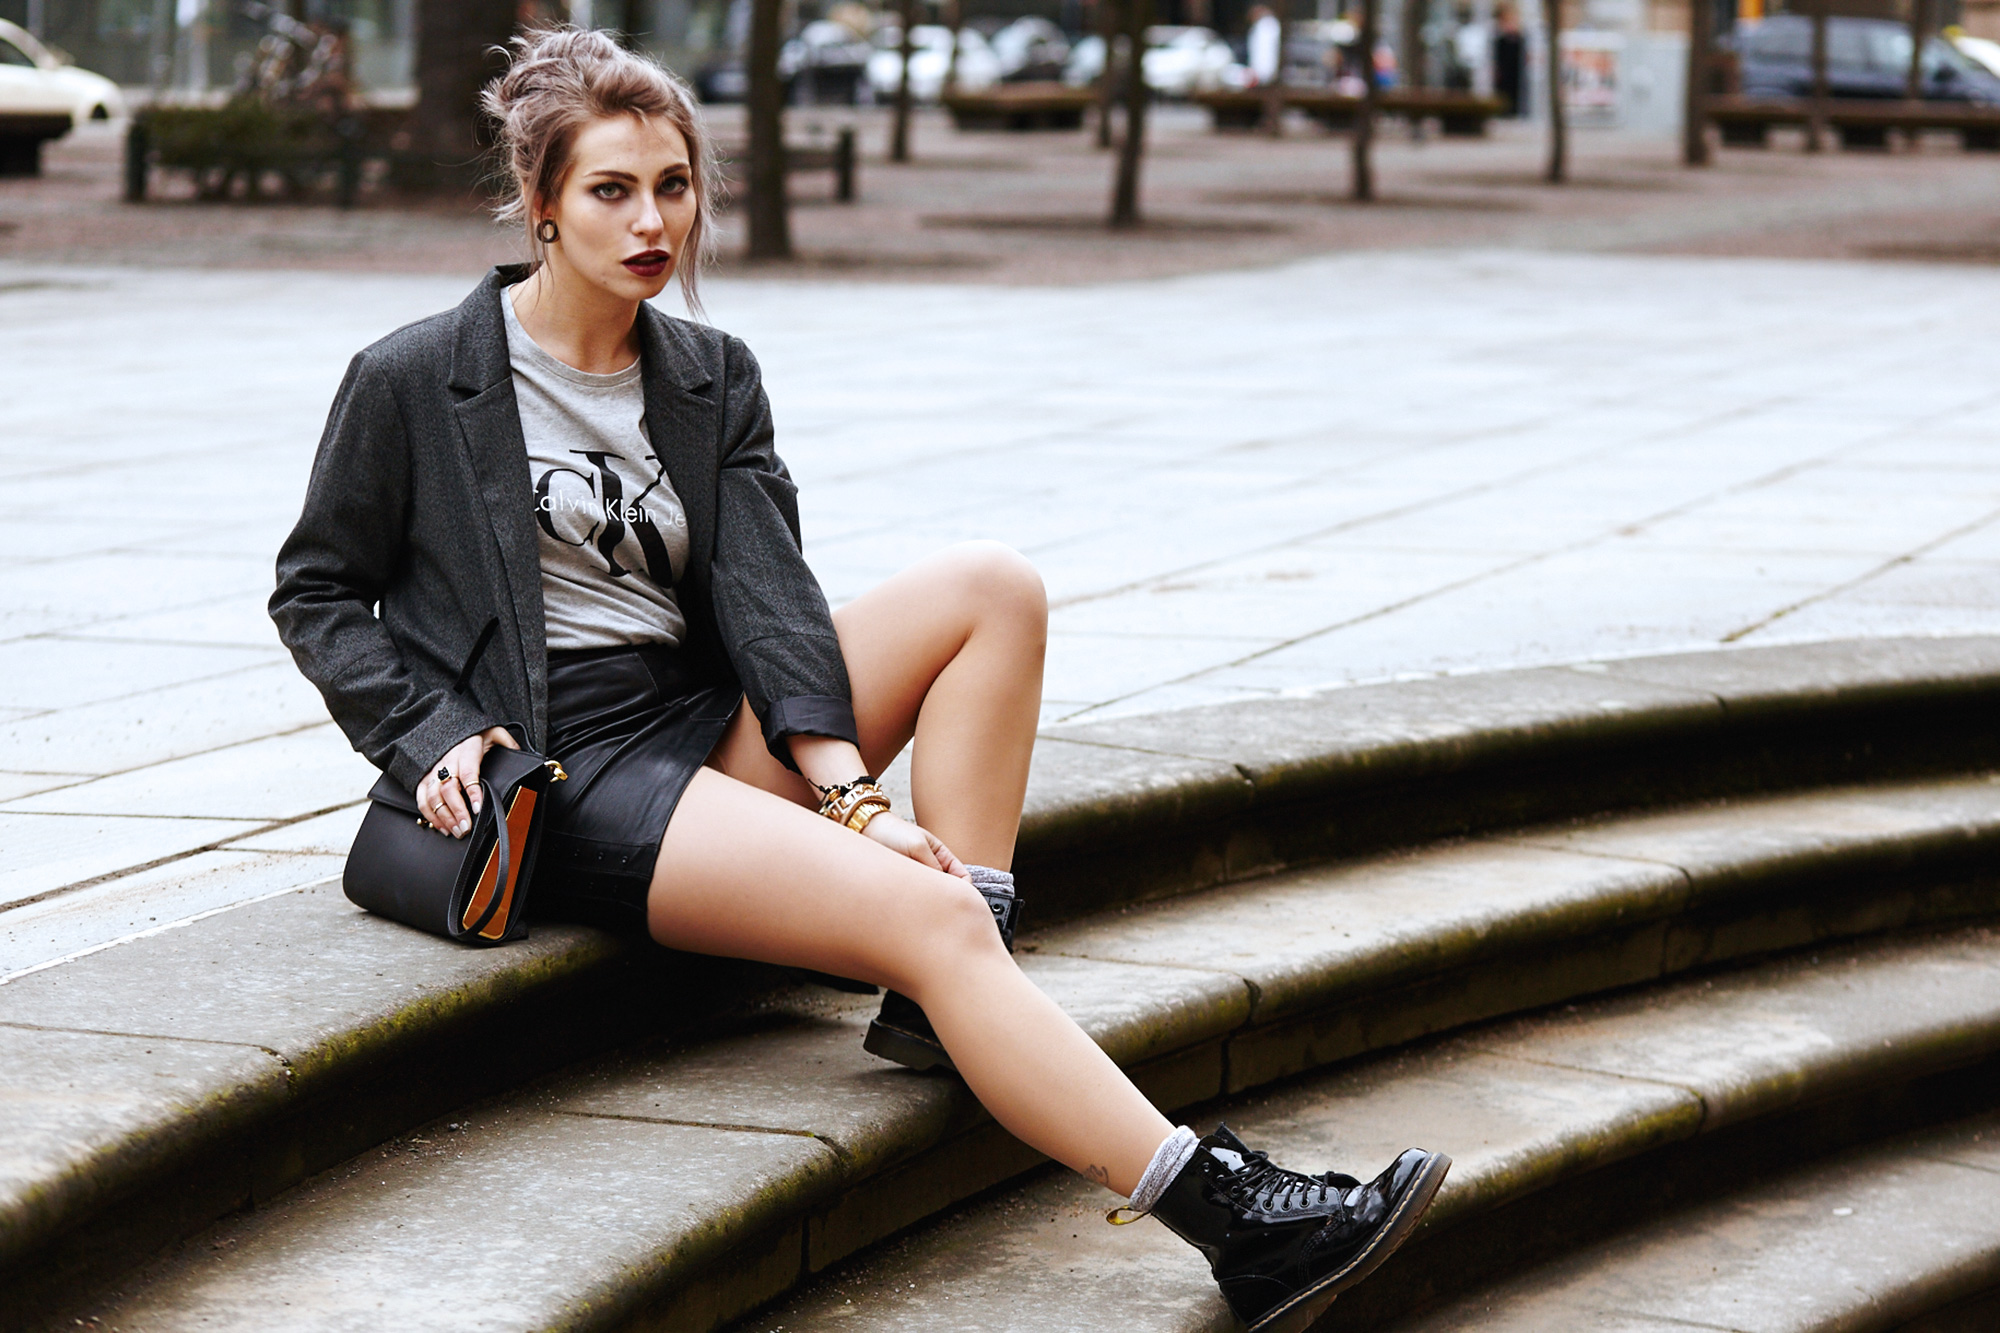 90s revival grunge outfit calvin klein trend berlin german fashionblogger fashion blogger outfit street style dr.martens marni elegant